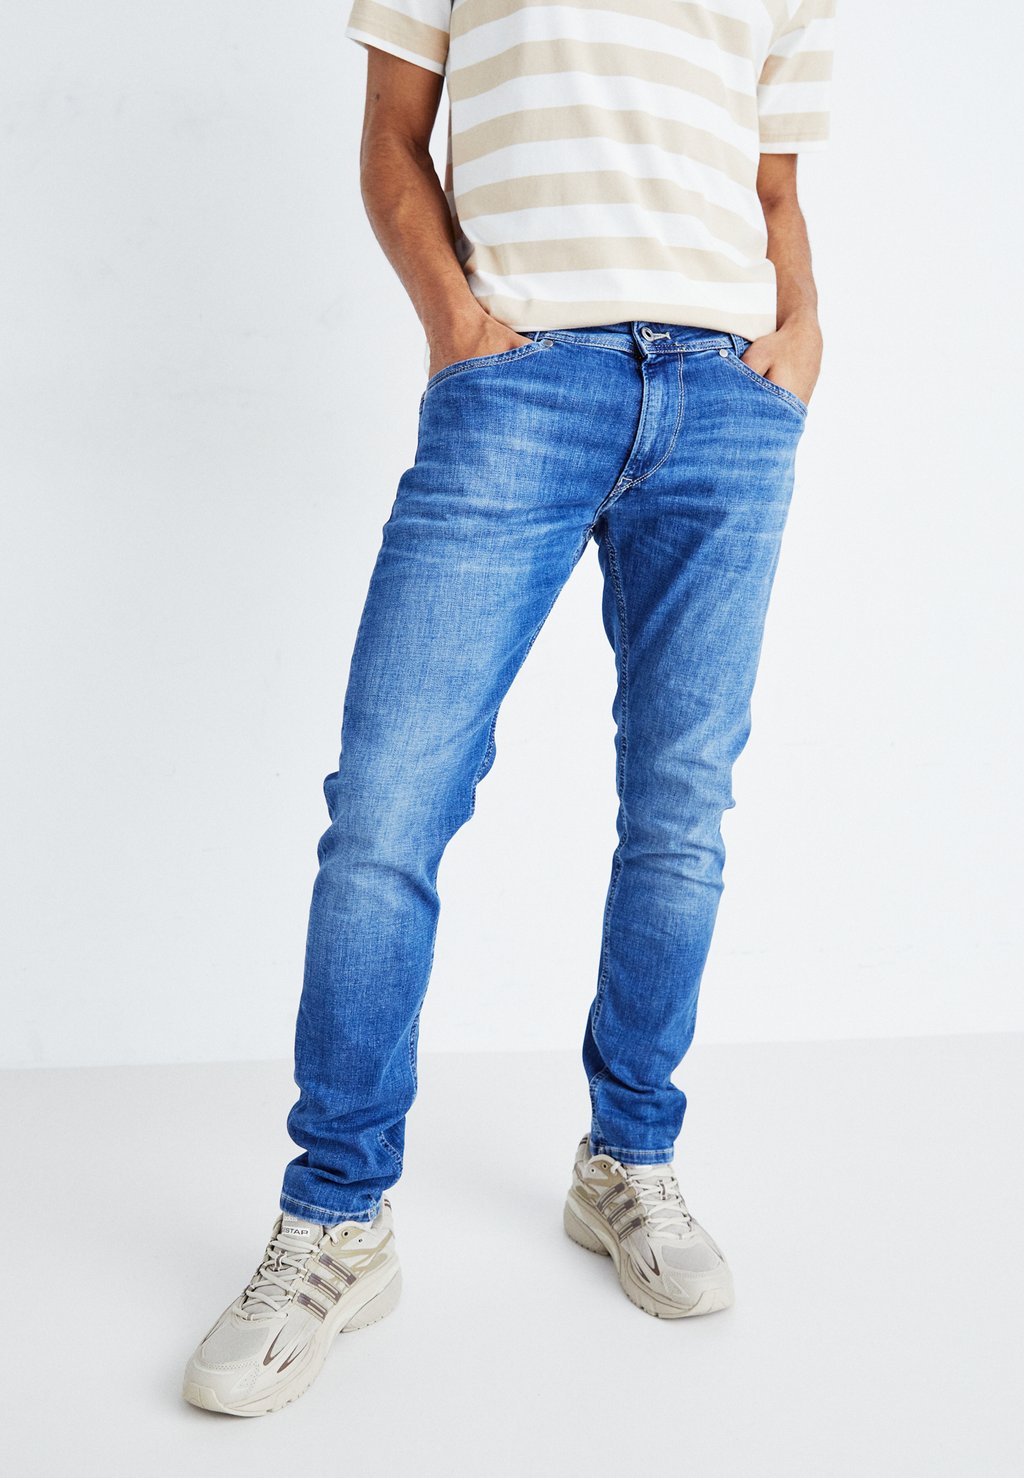 Джинсы Tapered Fit Tapered Jeans Pepe Jeans, цвет 000denim джинсы tapered fit gymdigo pepe jeans цвет denim